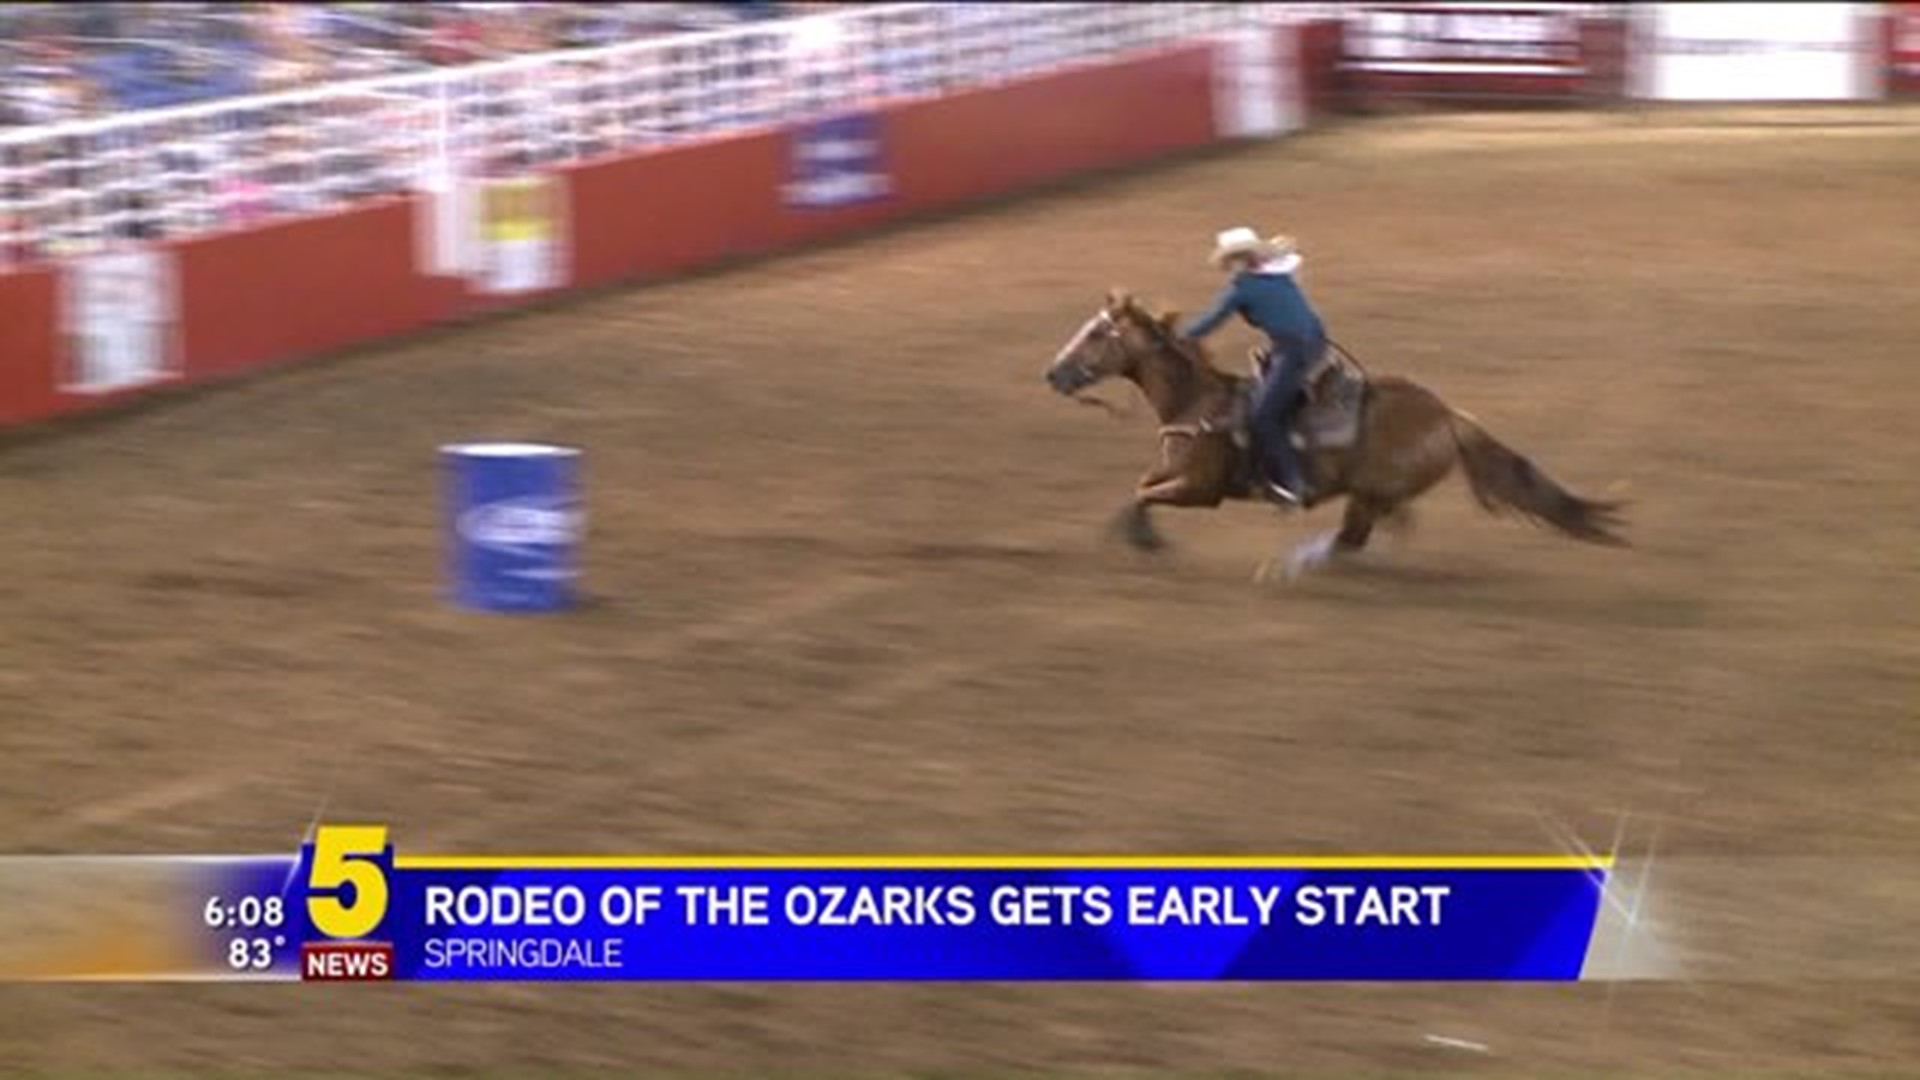 RODEO OF THE OZARK MOVED UP